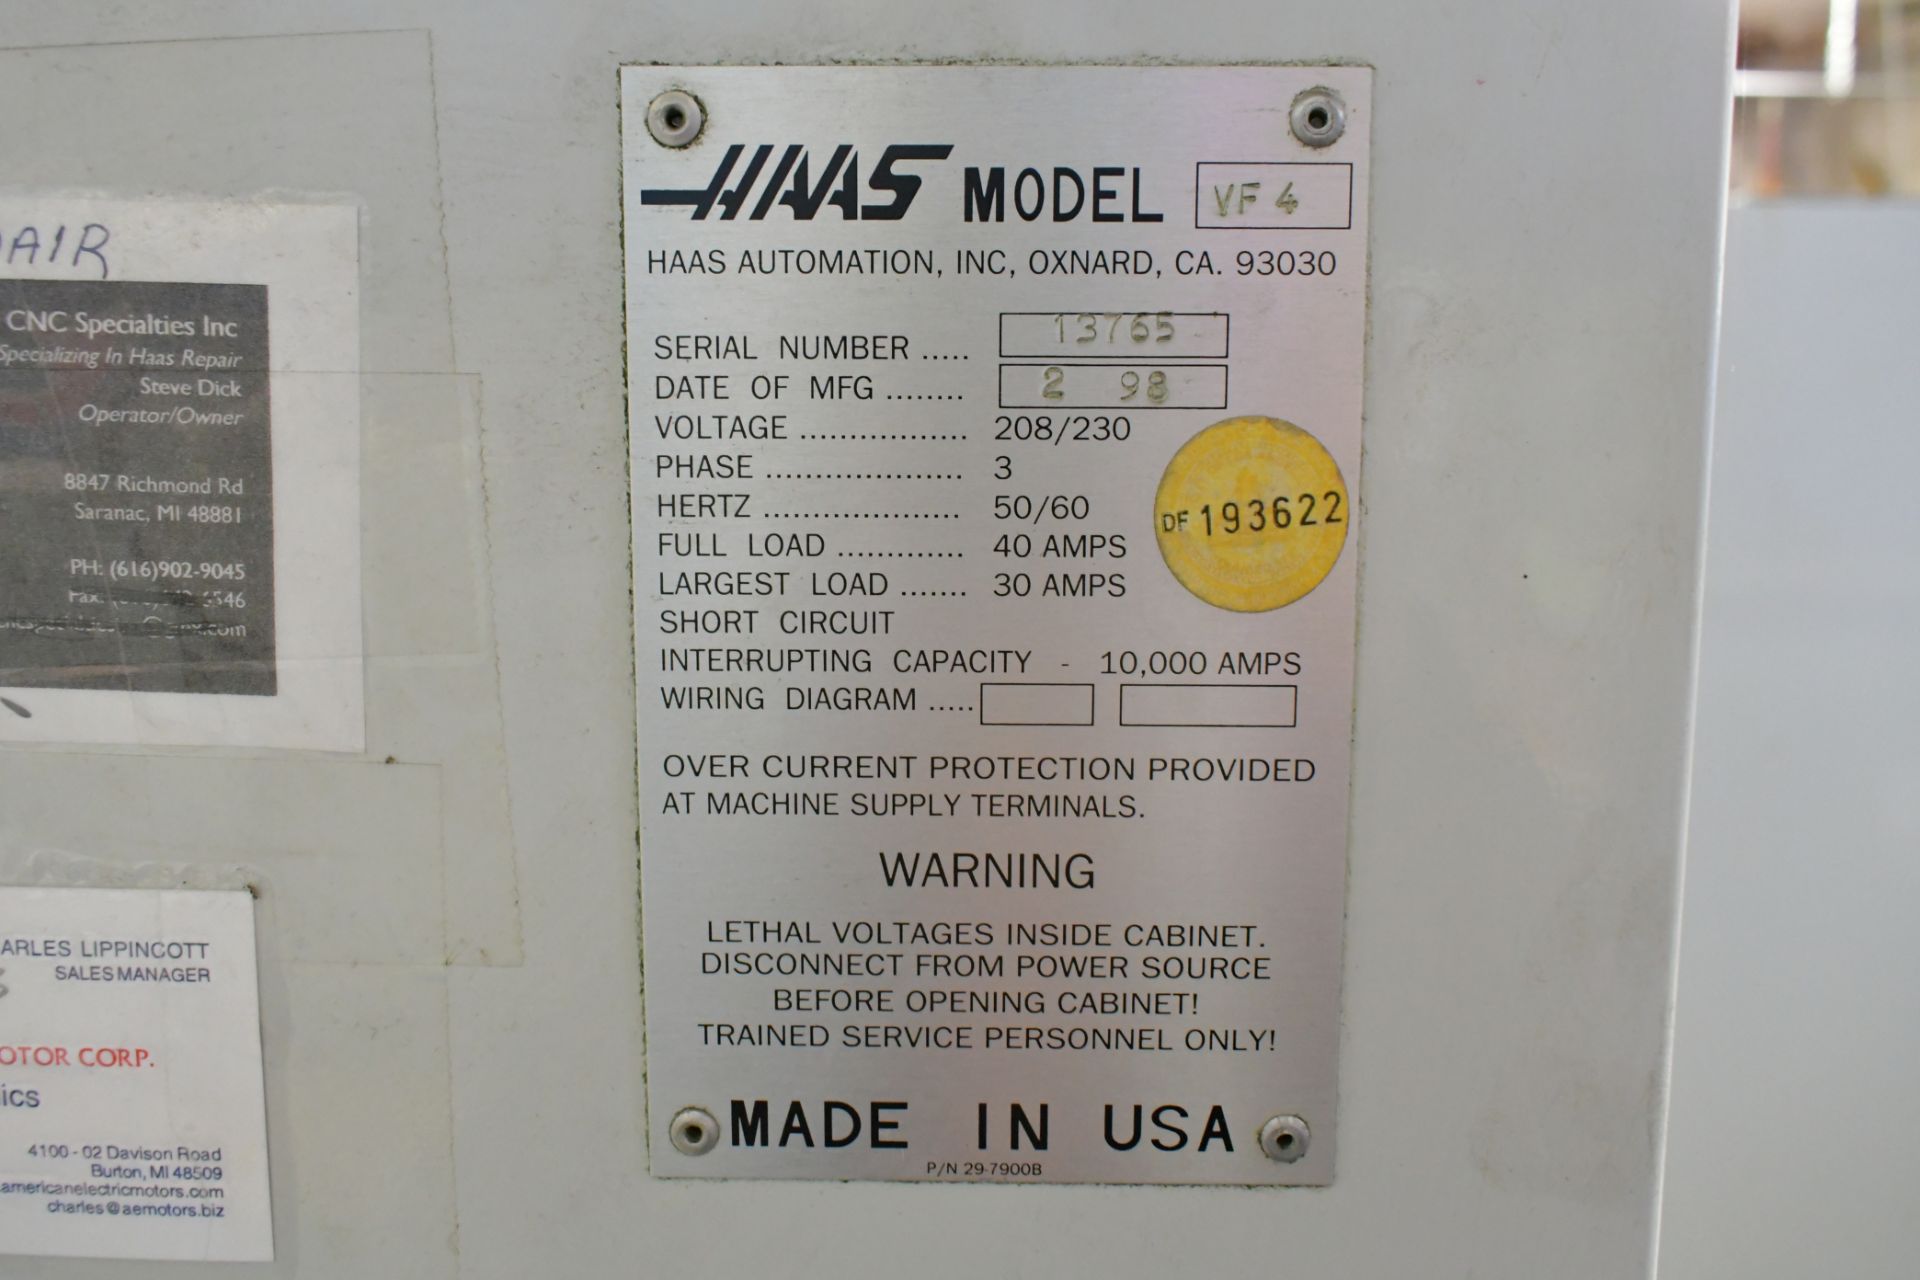 Haas VF-4 CNC Vertical Machining Center - Image 9 of 9